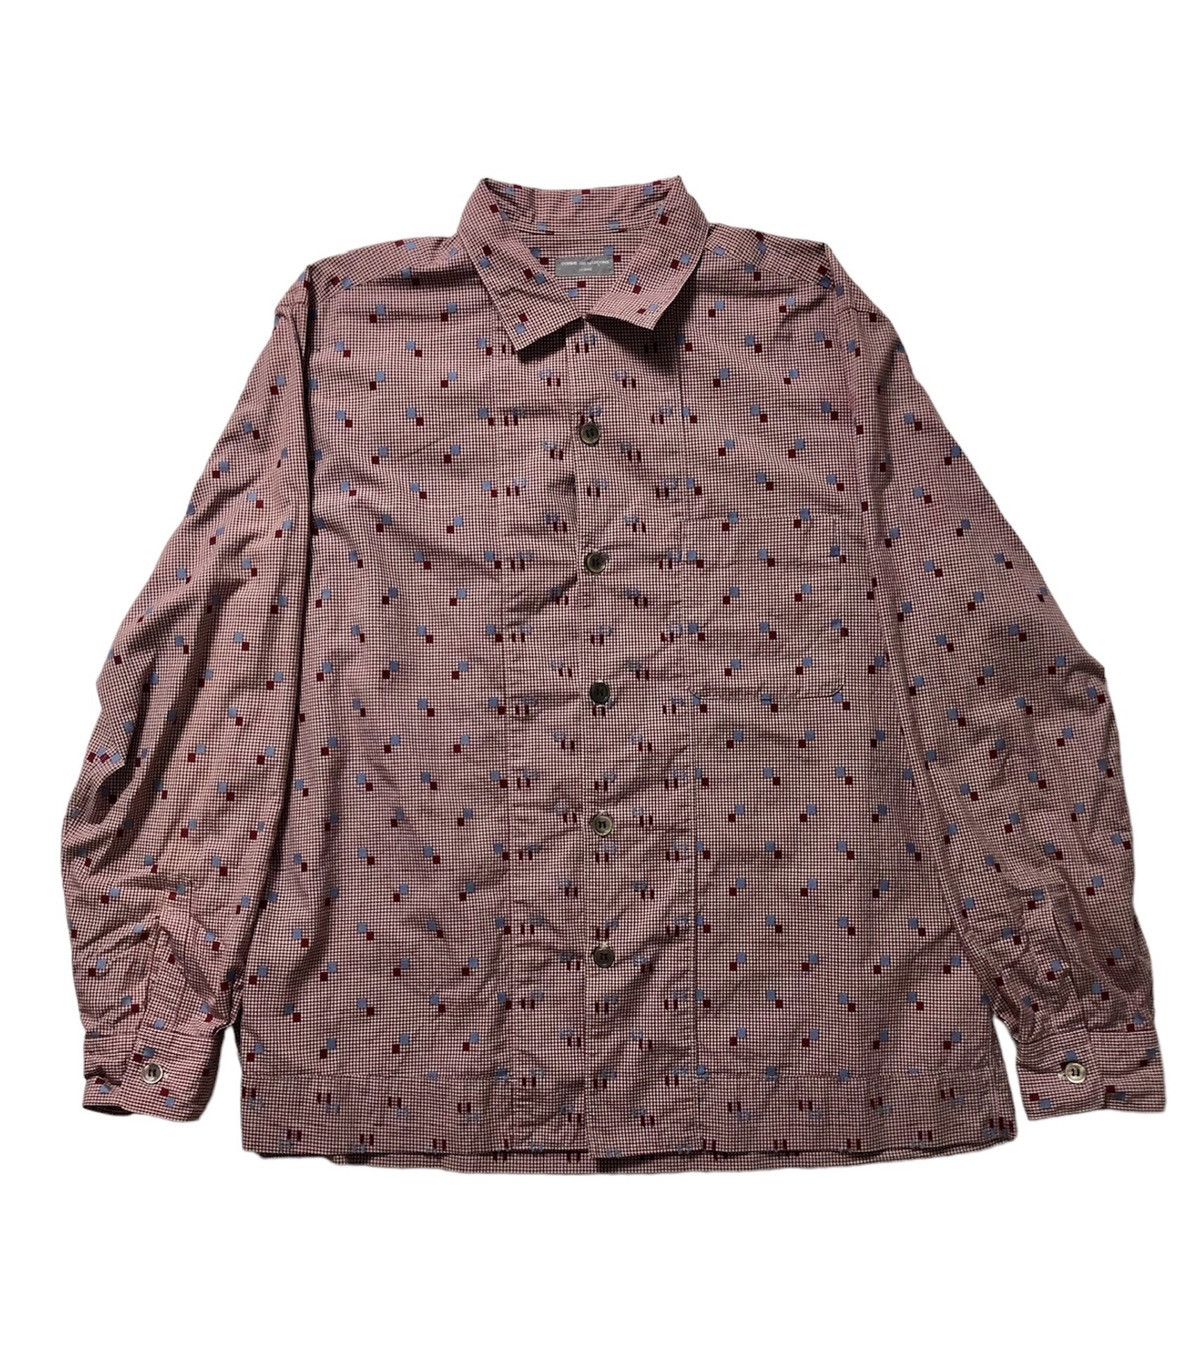 AW02 Comme Des Garcons Small Box Longsleeve Shirt - 1